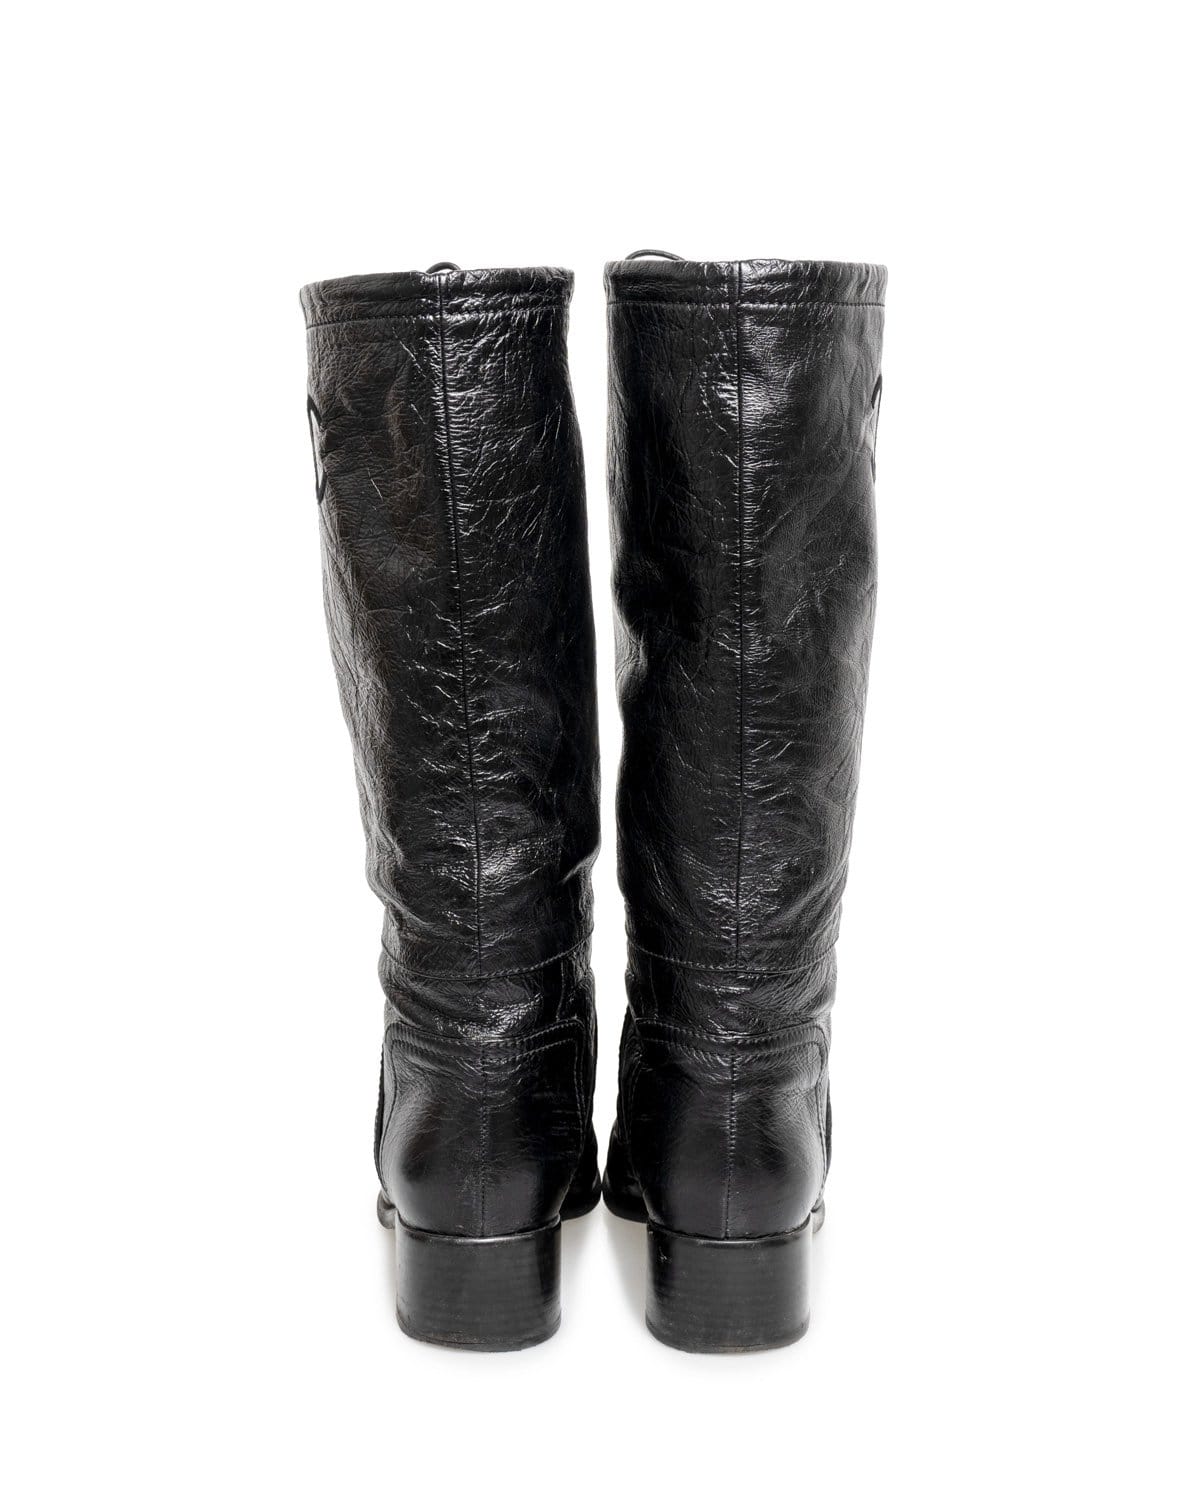 Chanel Chanel Boots Size 40 Patent - ADL1596